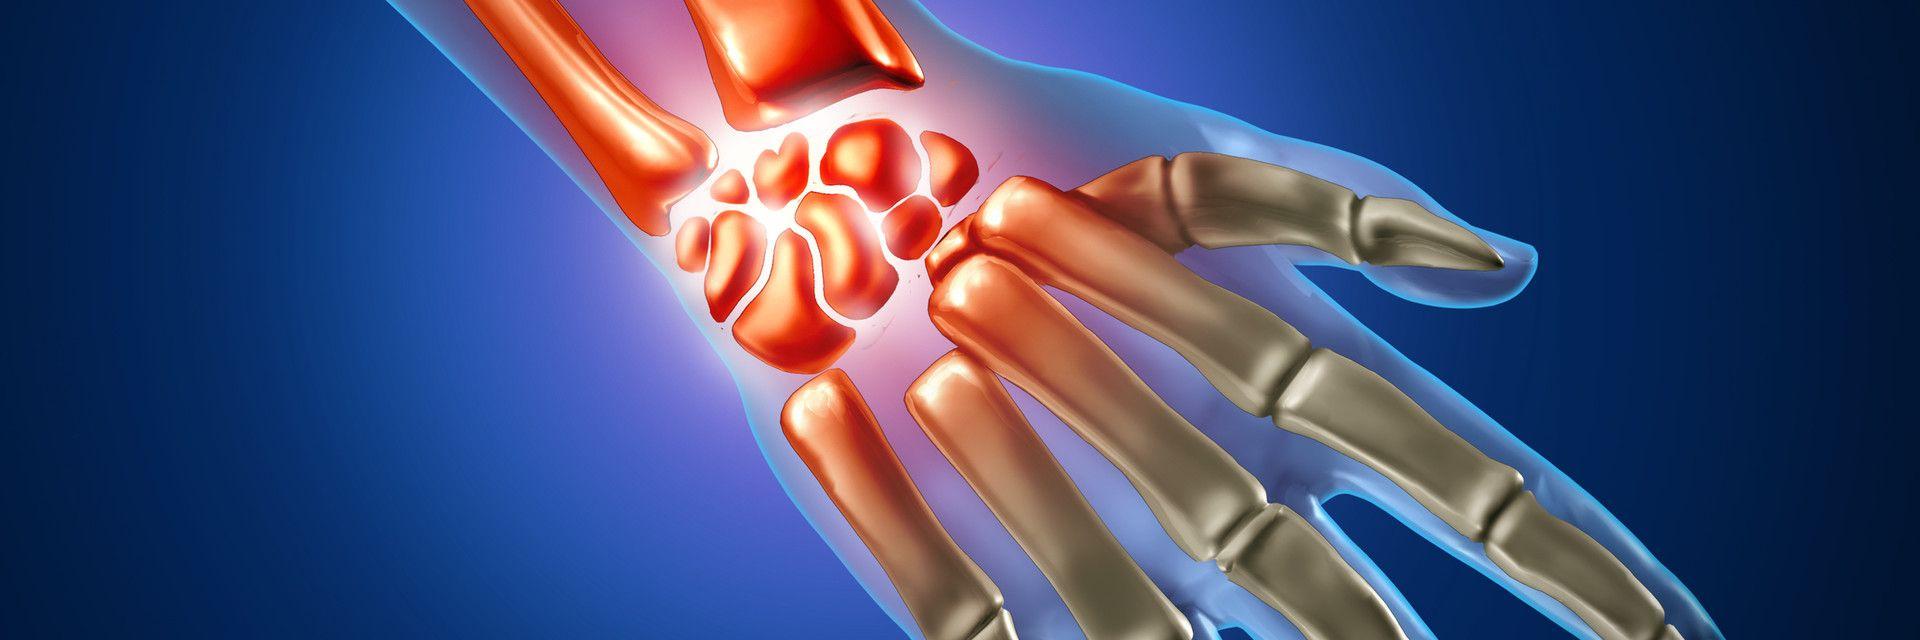 Carpal Tunnel Syndrome Specialist - Palm Harbor, FL: Orthopedic  Specialists: Orthopedic Surgeon